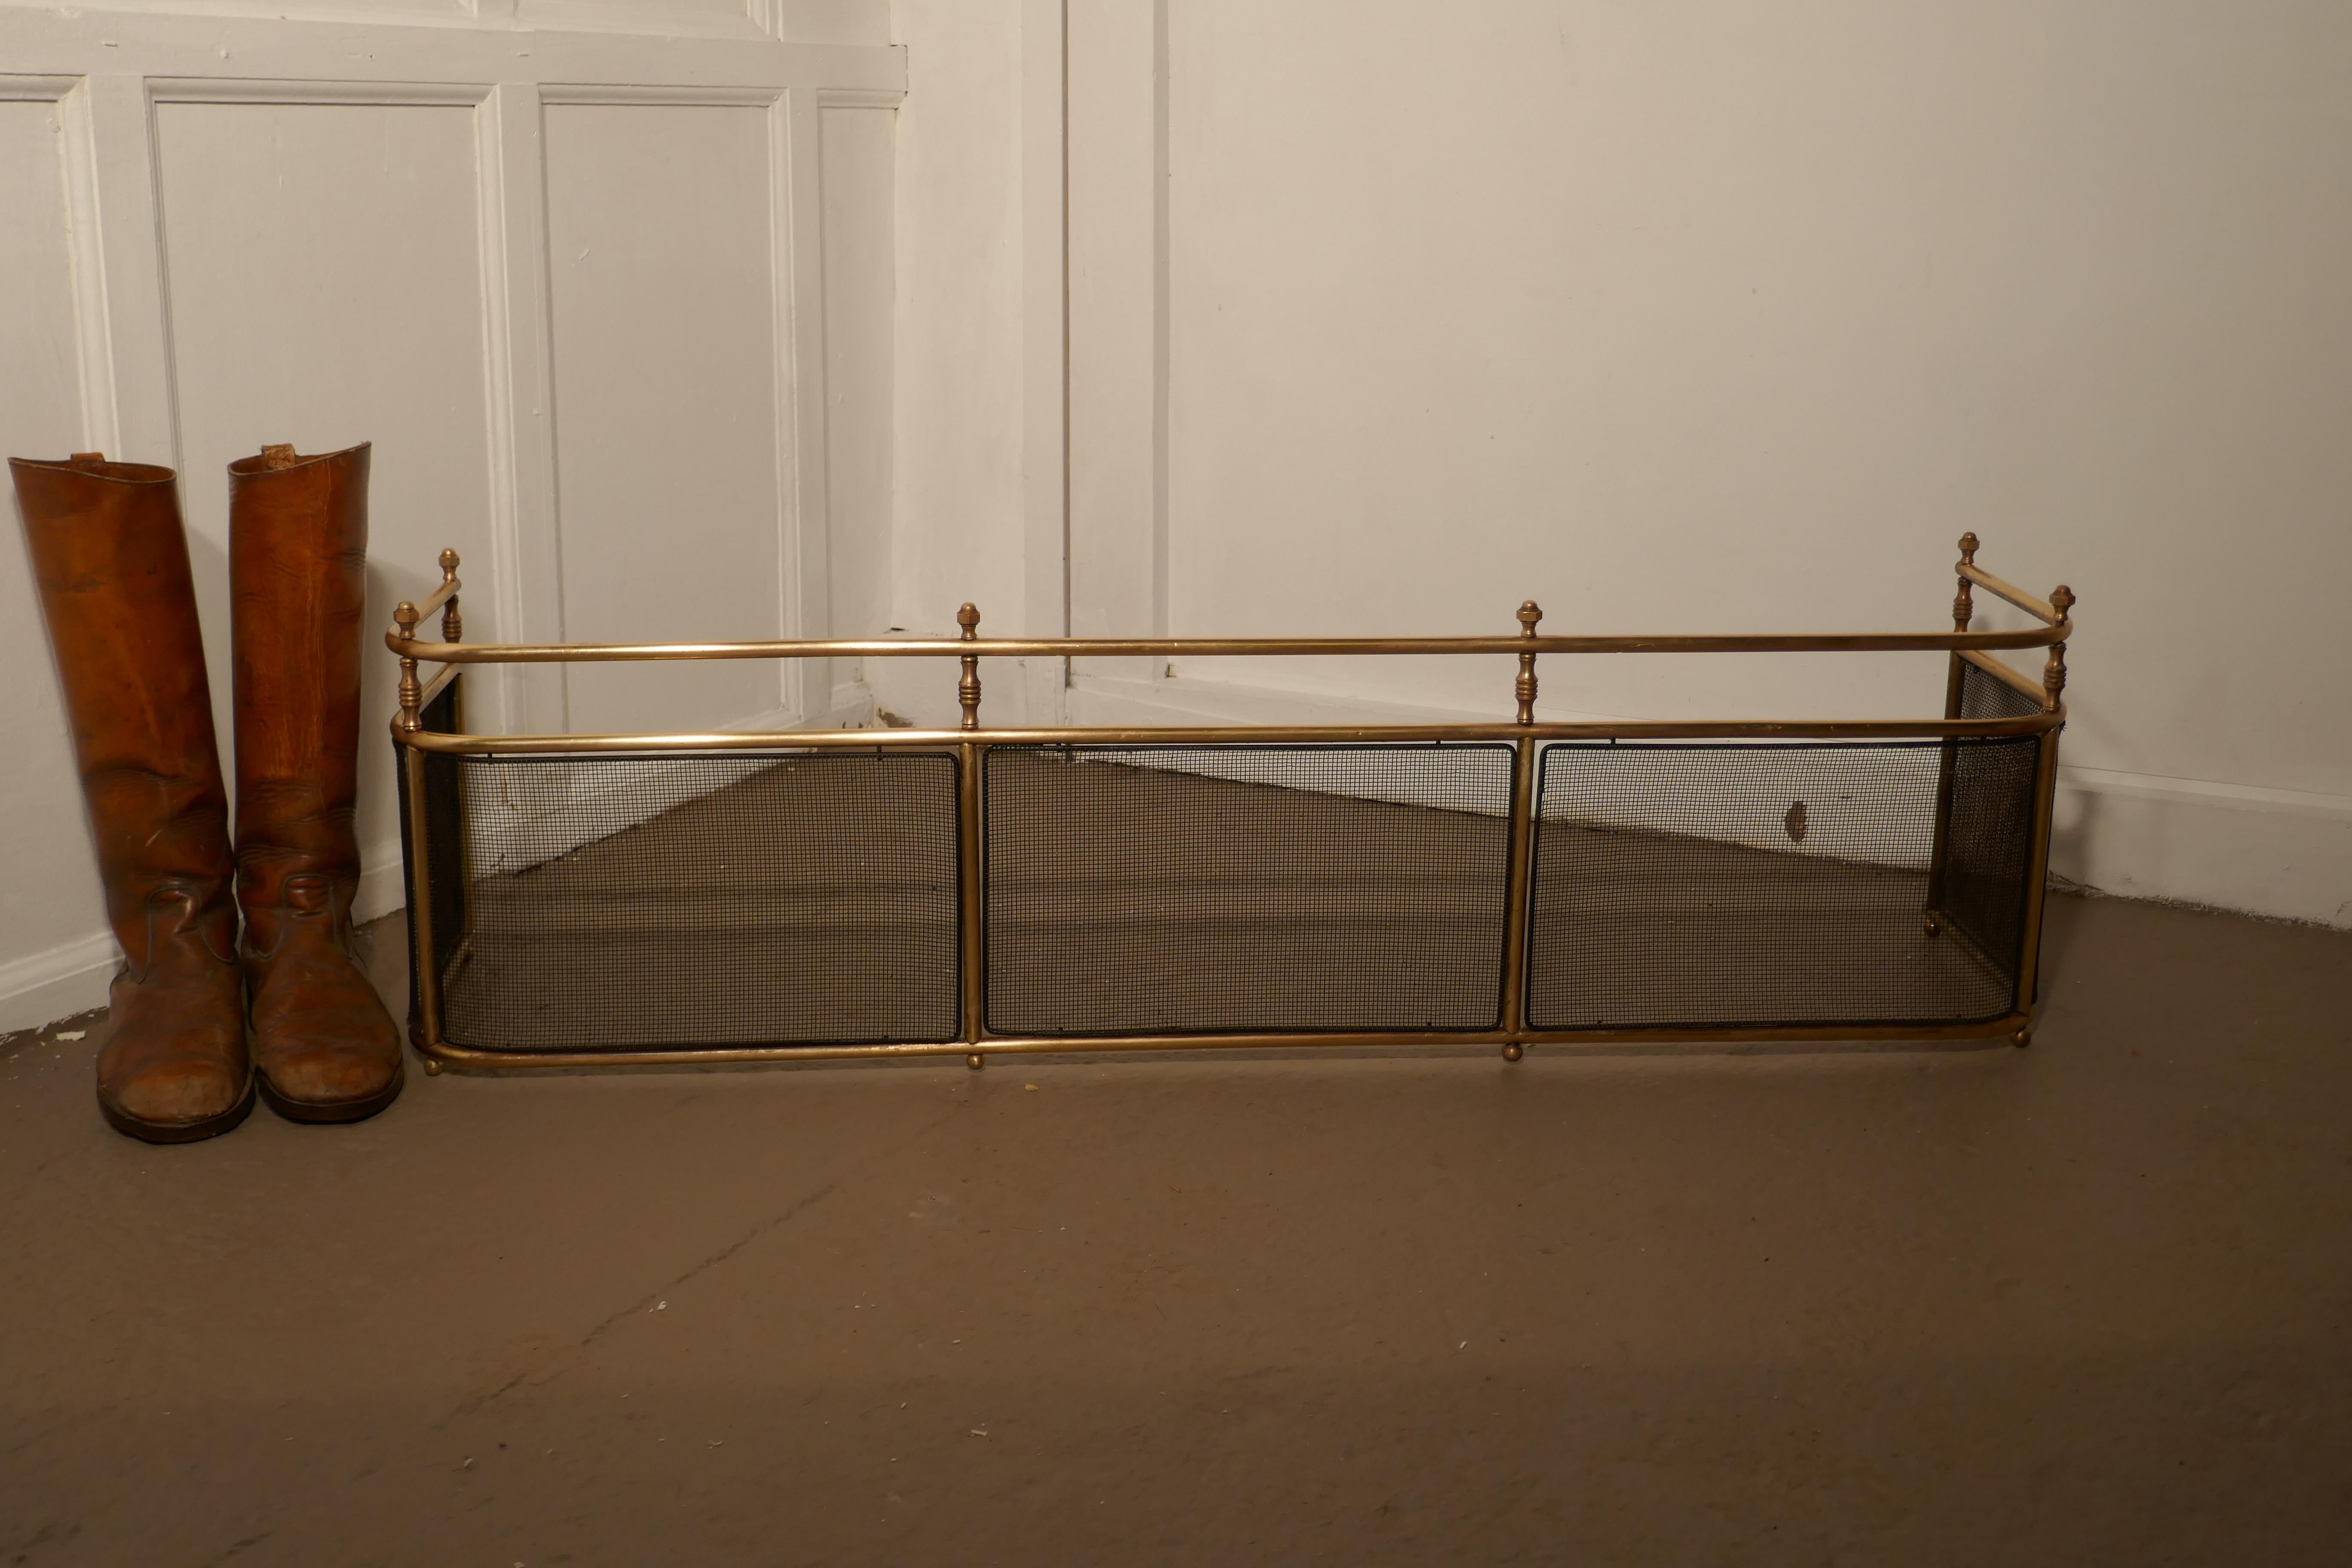 A large Victorian brass club fender

This is a Victorian antique Club Fender often known as a nursery guard as it completely surrounds the fire. 
This Fender is top quality and very heavy it is made in solid brass, the fender has wire mesh panels